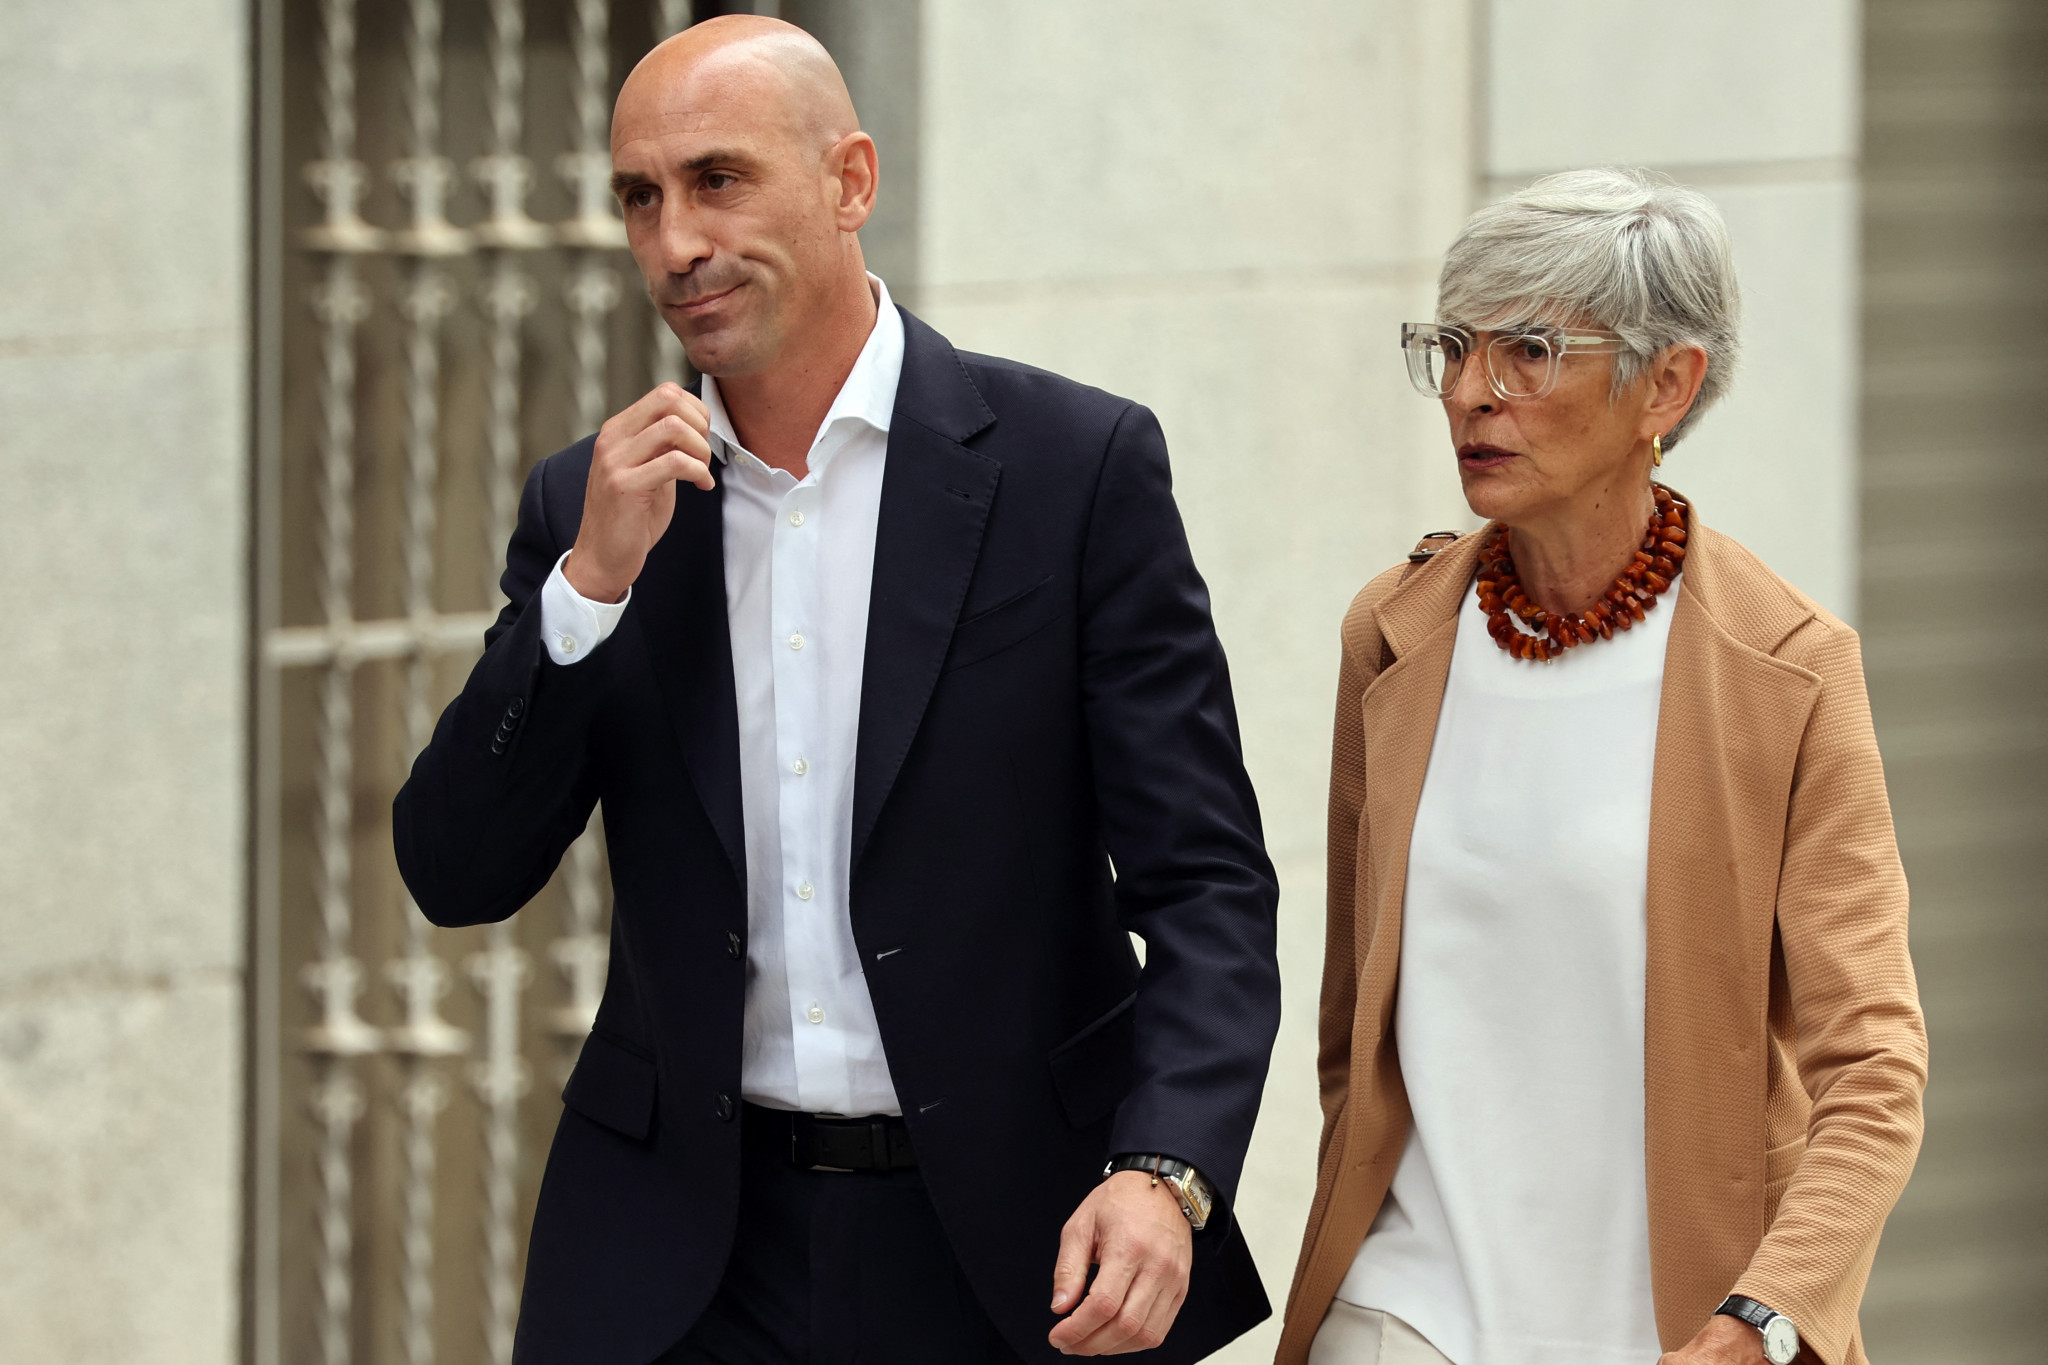 Luis Rubiales, left, leaves the court in Madrid with his lawyer Olga Tubau after appearing in front of a judge for the first time ©Getty Images 